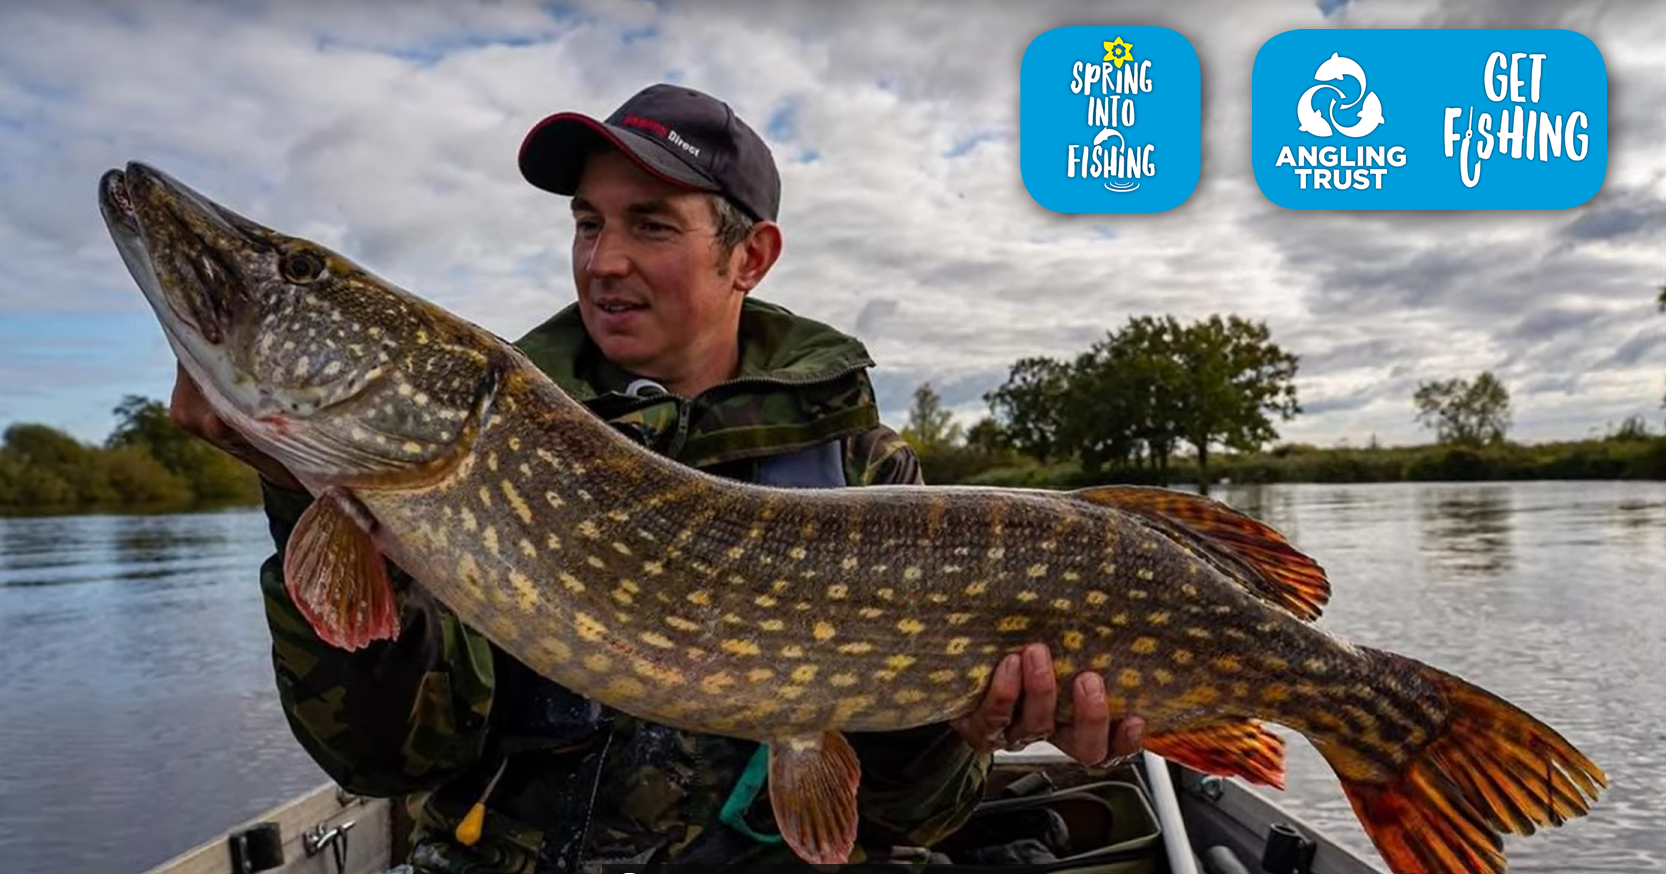 Get Fishing | Phil Spinks Get Fishing and Spring into Fishing